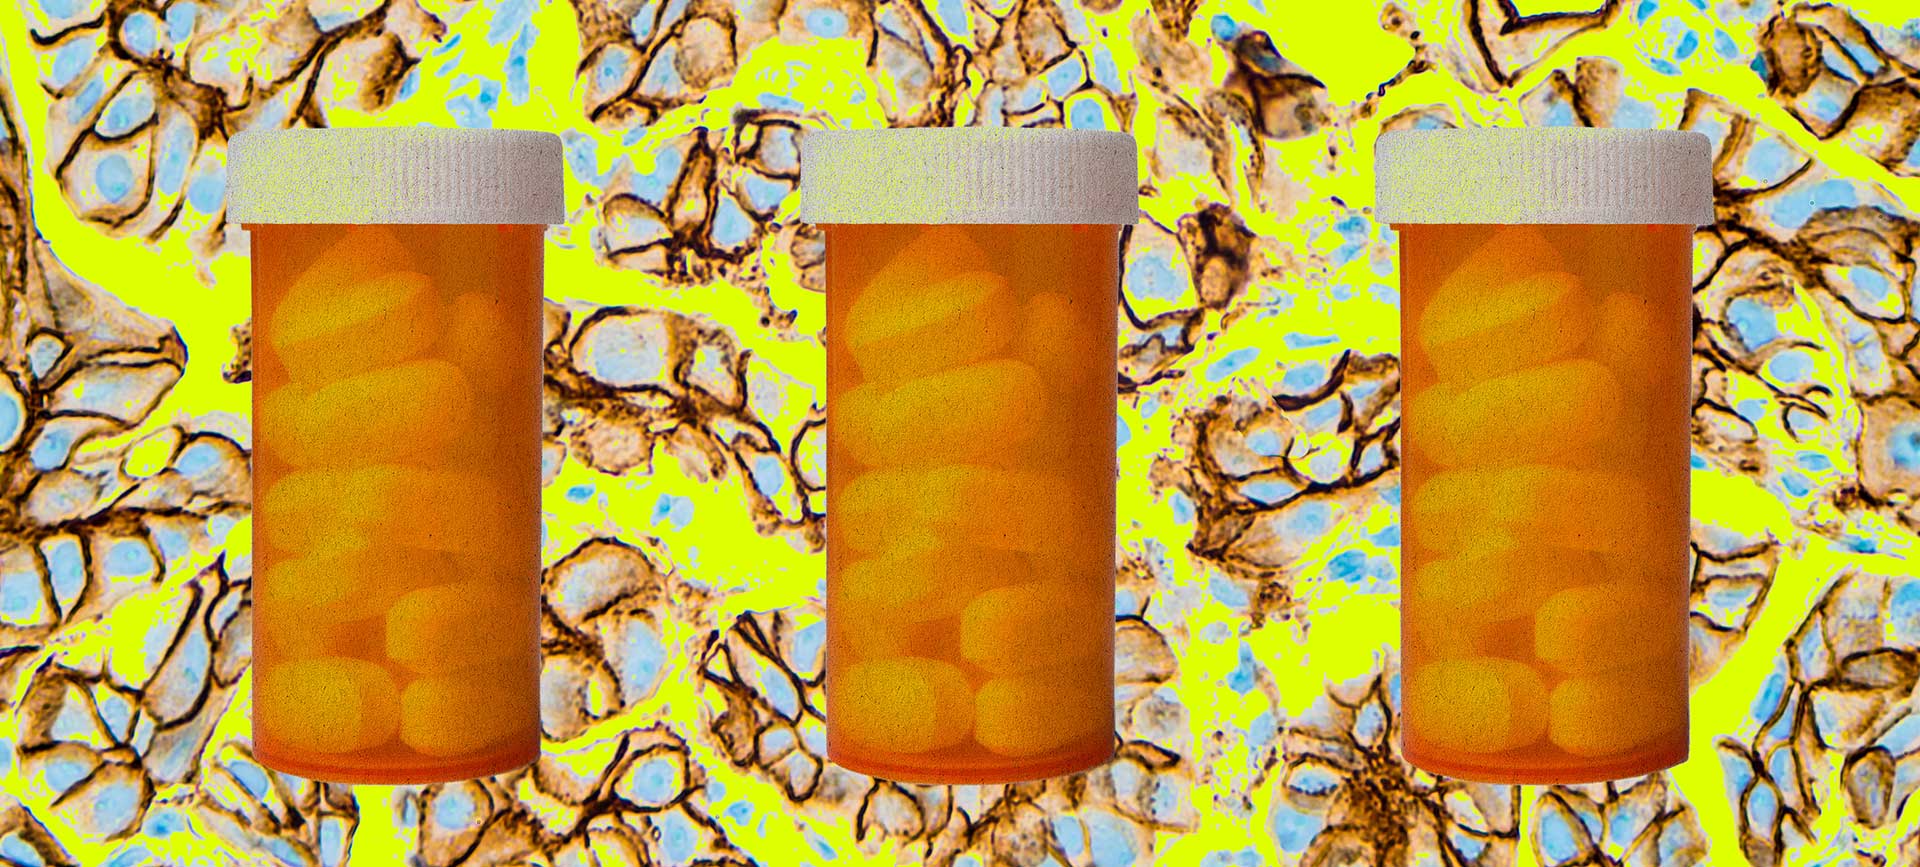 Three bottles of pills are lined up against a yellow and brown pattern of cancer cells.